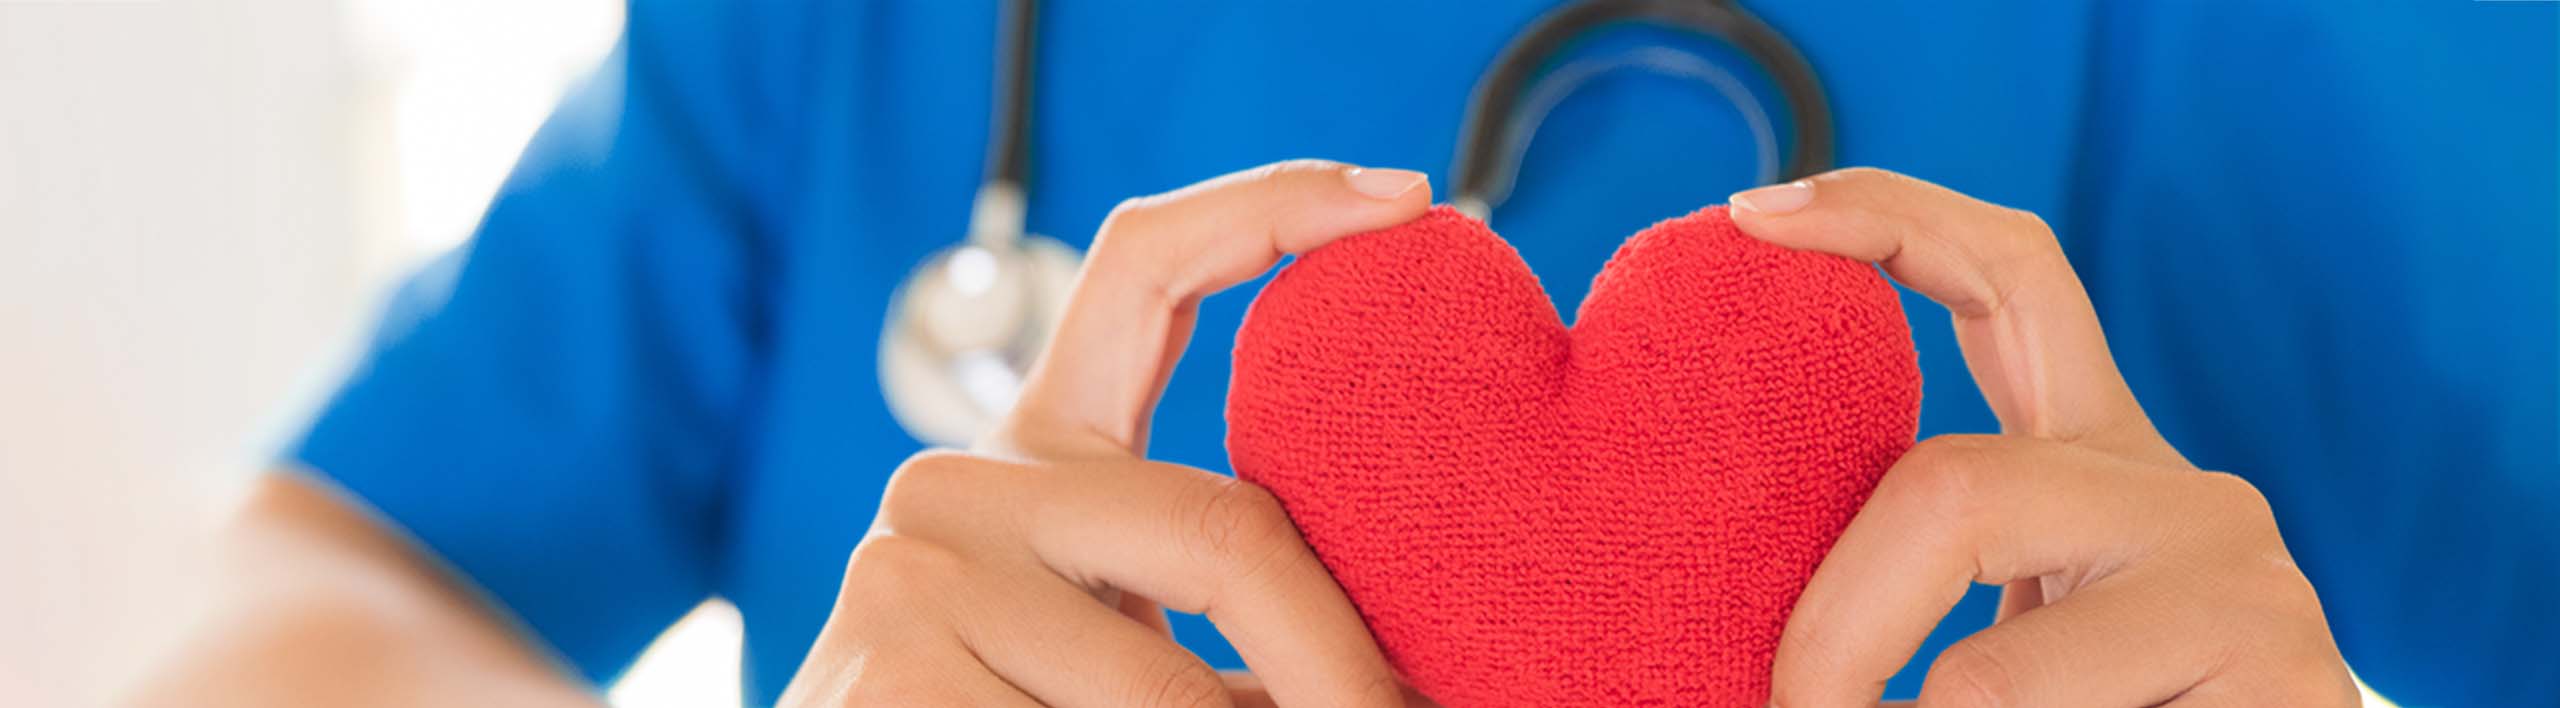 Medical worker holding knitted heart